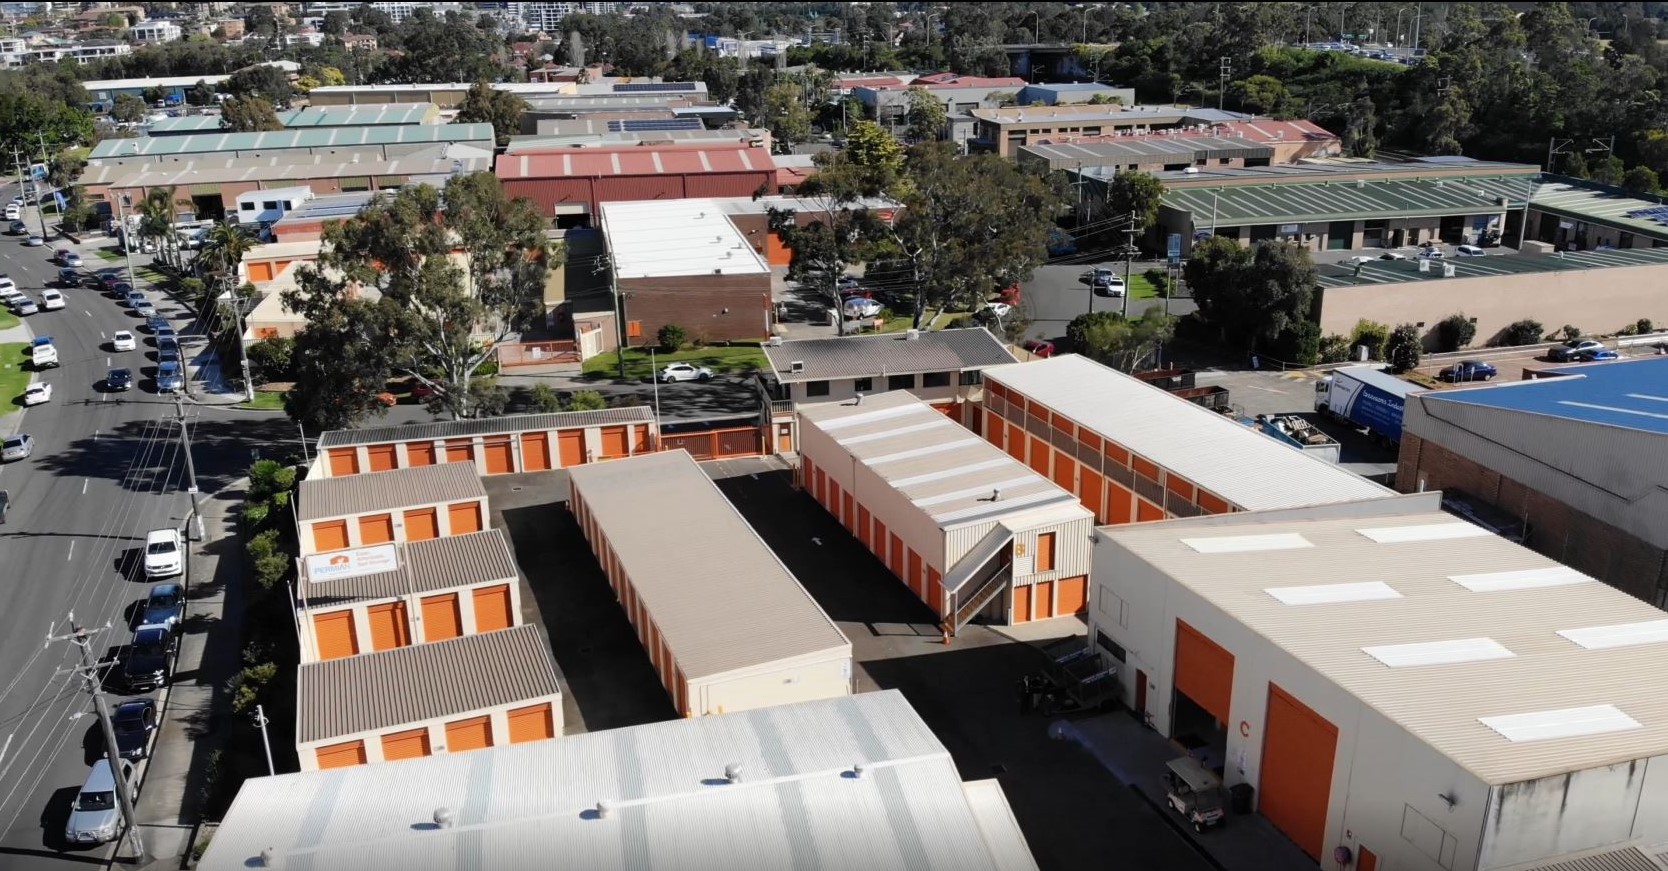 ABACUS PROPERTY GROUP ACQUIRE ANOTHER WOLLONGONG SELF-STORAGE ASSET